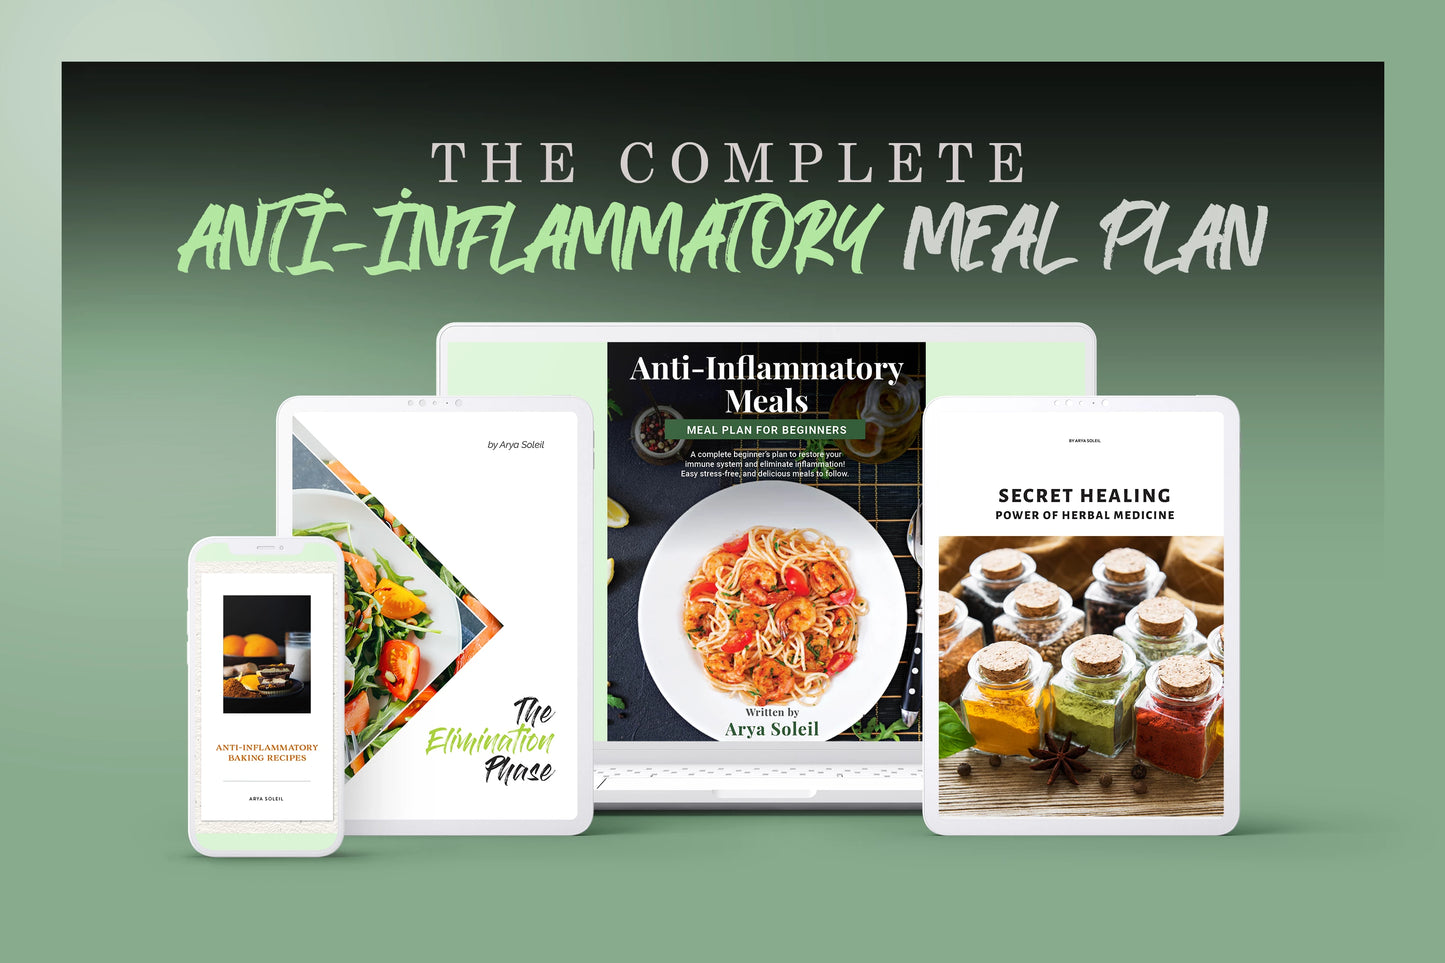 The Complete Anti-Inflammatory Meal Plan